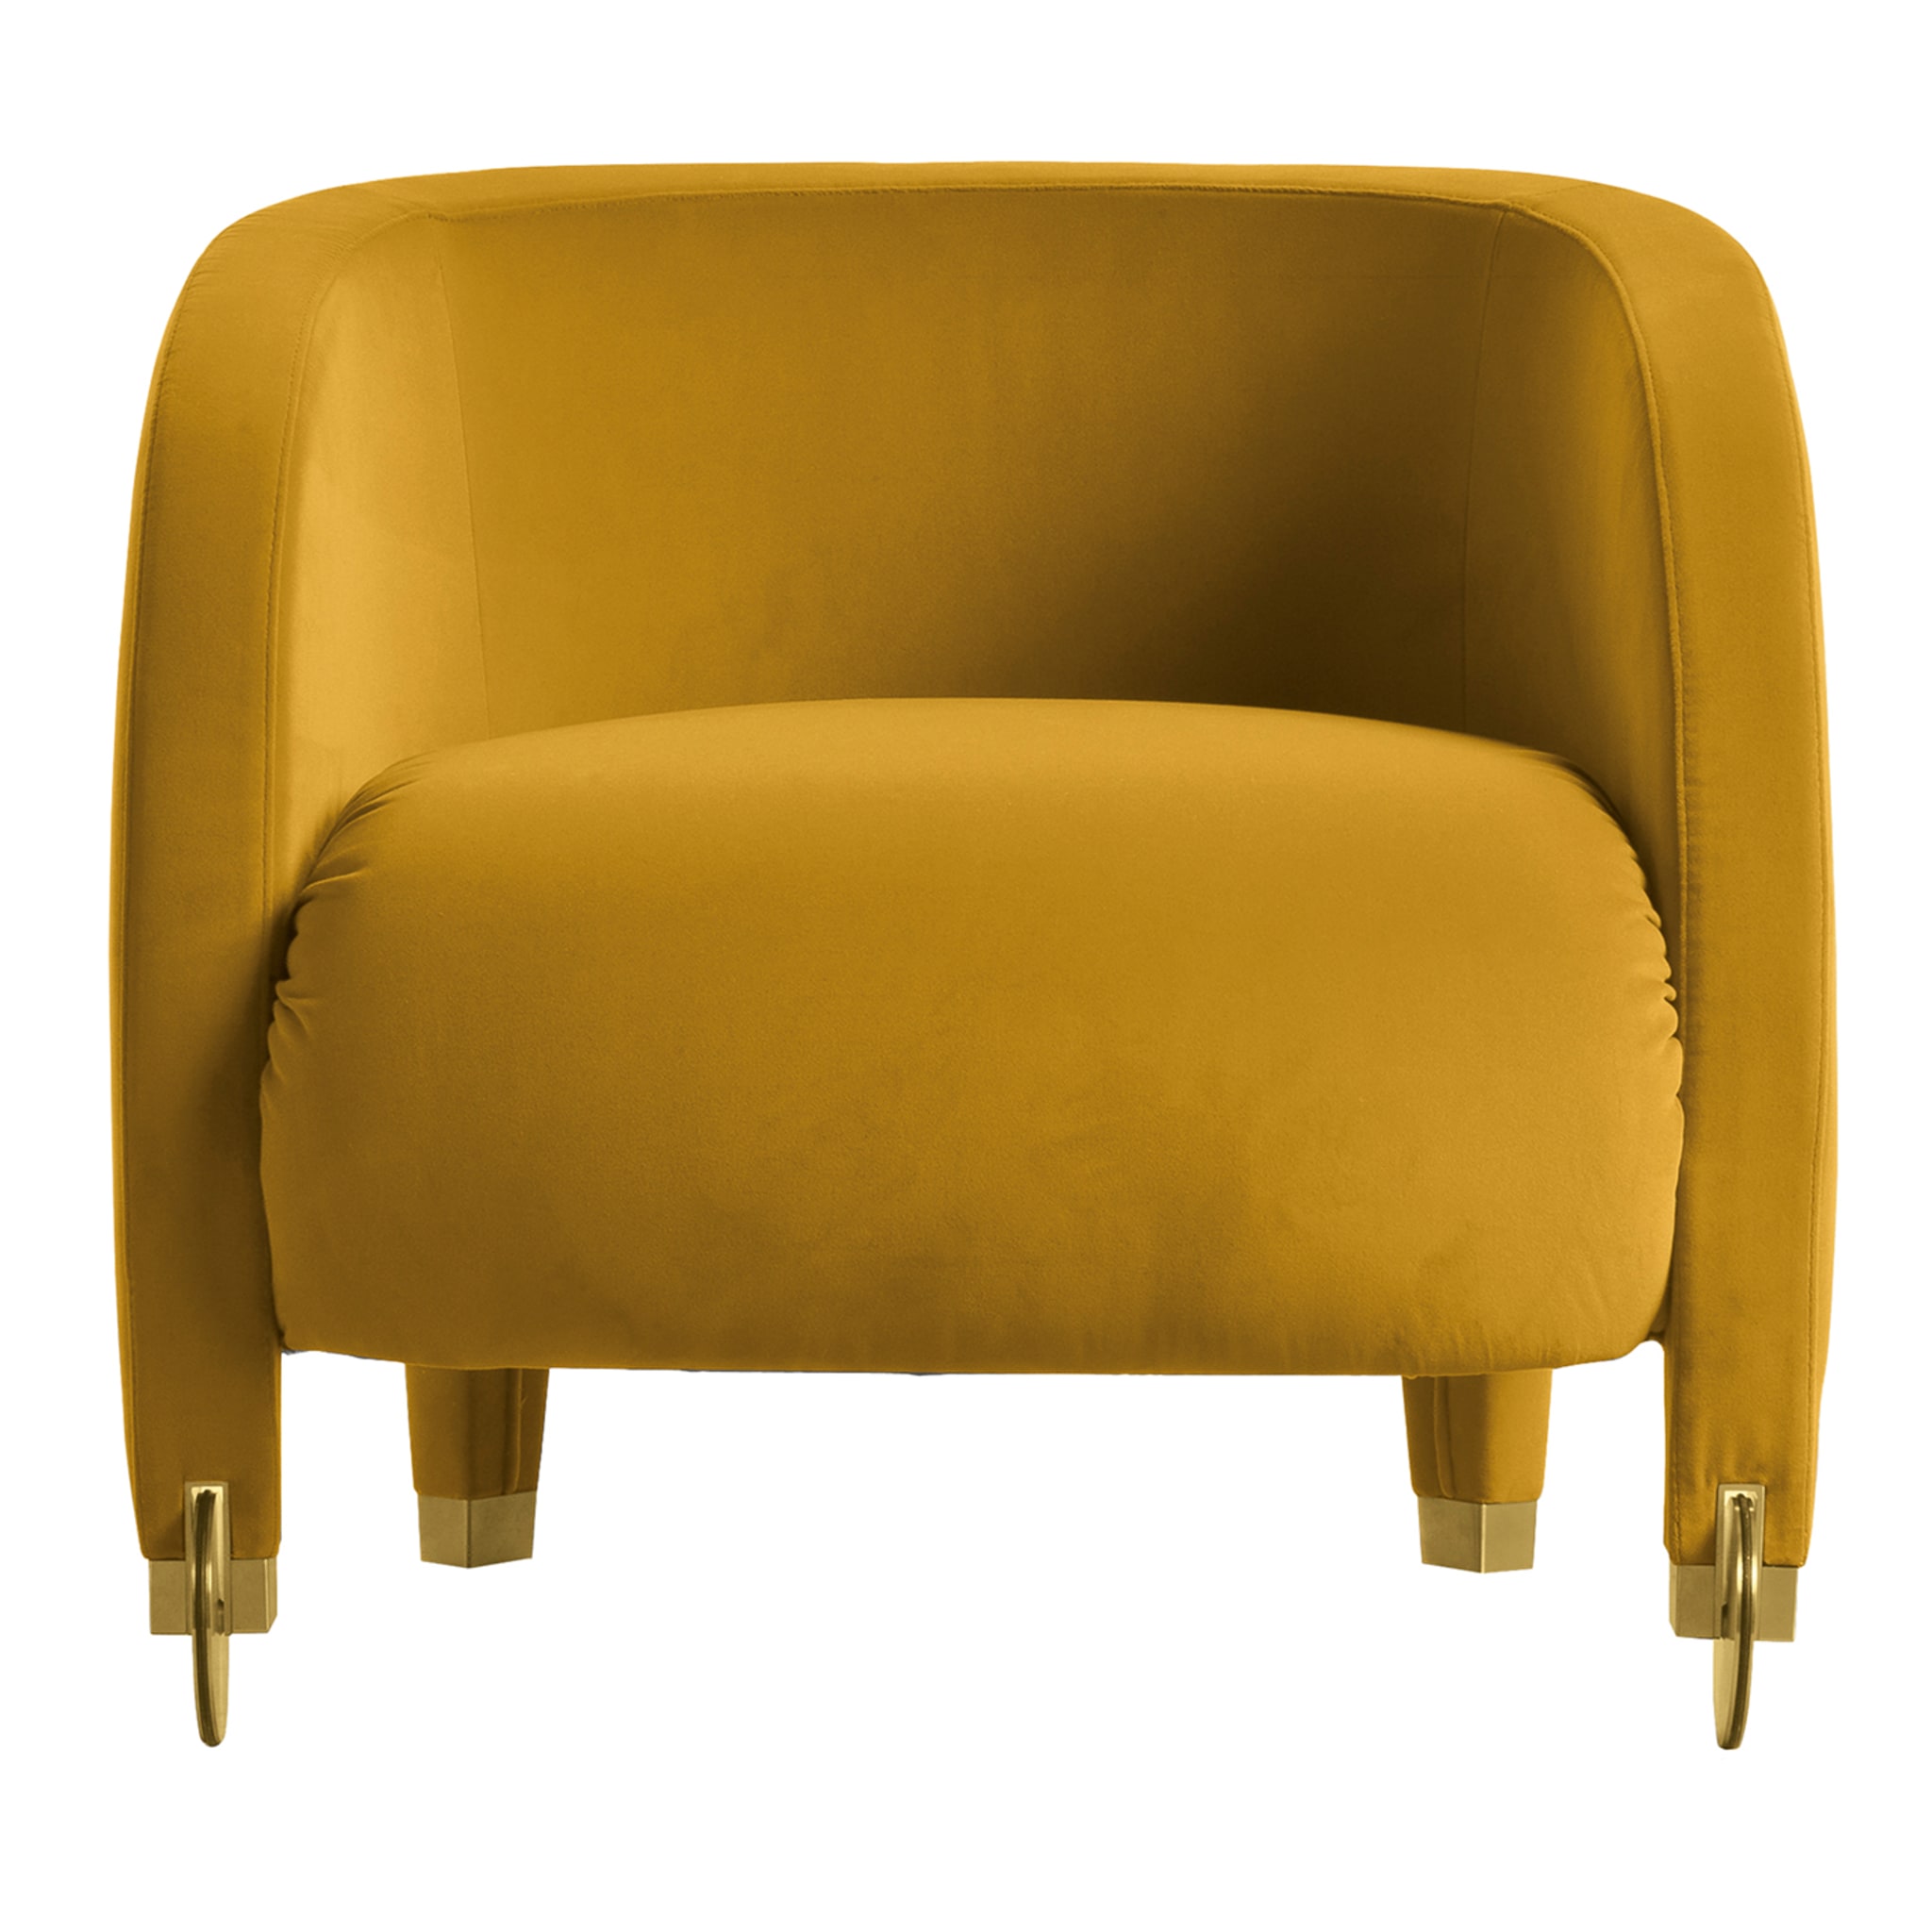 Adele Yellow Armchair by Dainelli Studio - Main view